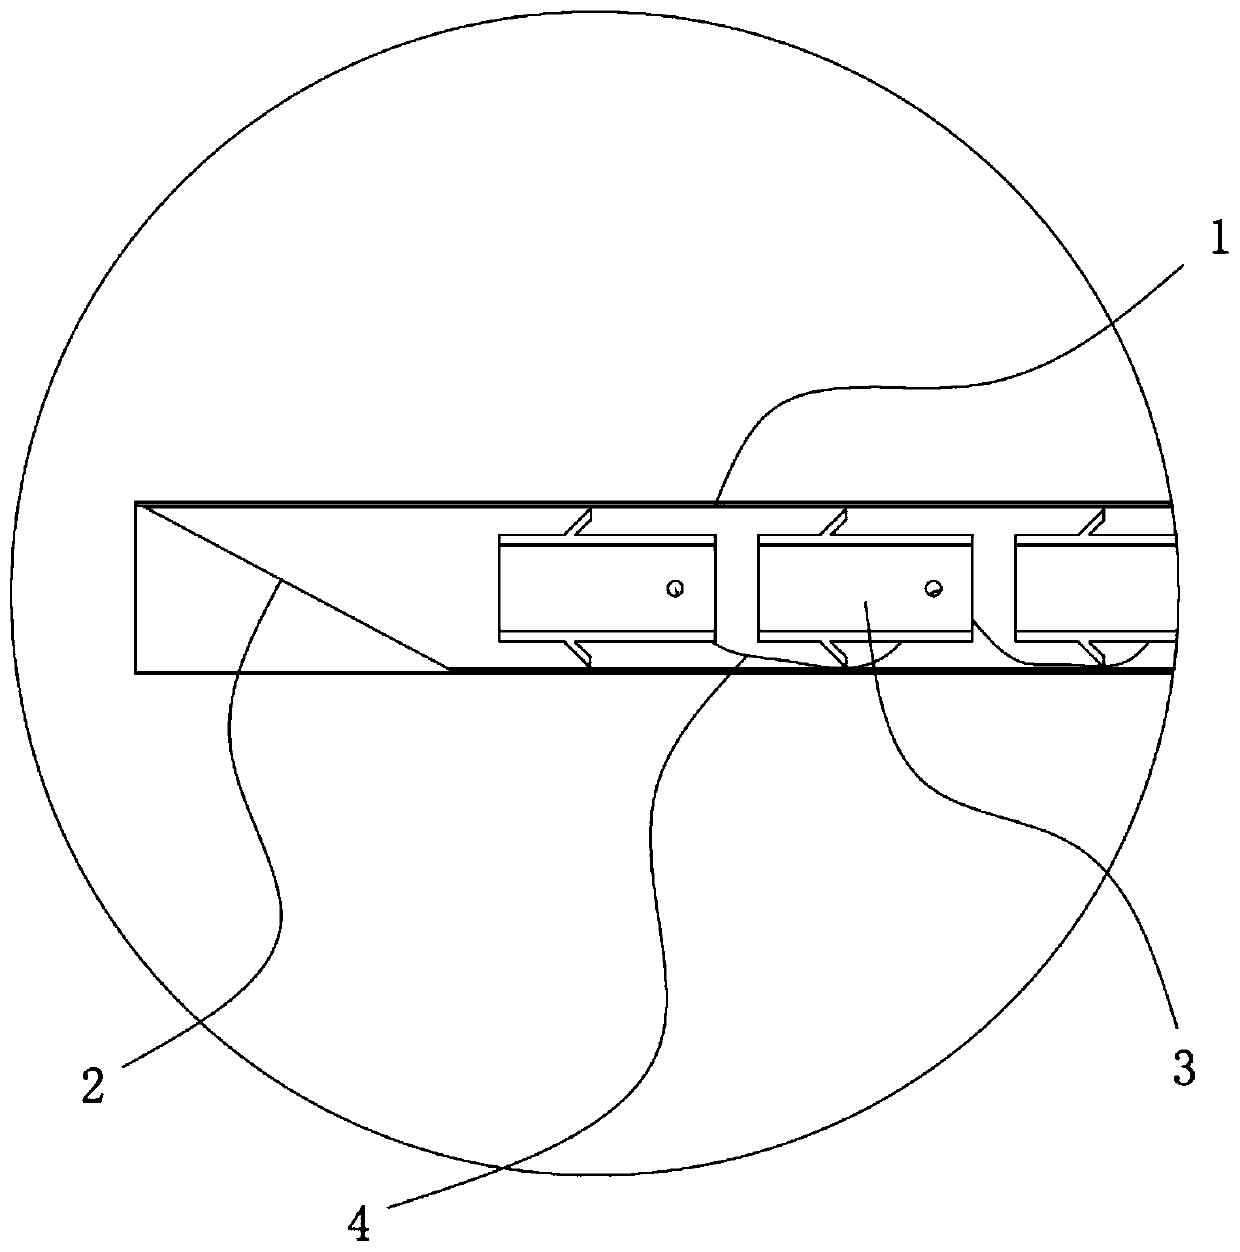 Annulus repair device and method of use thereof